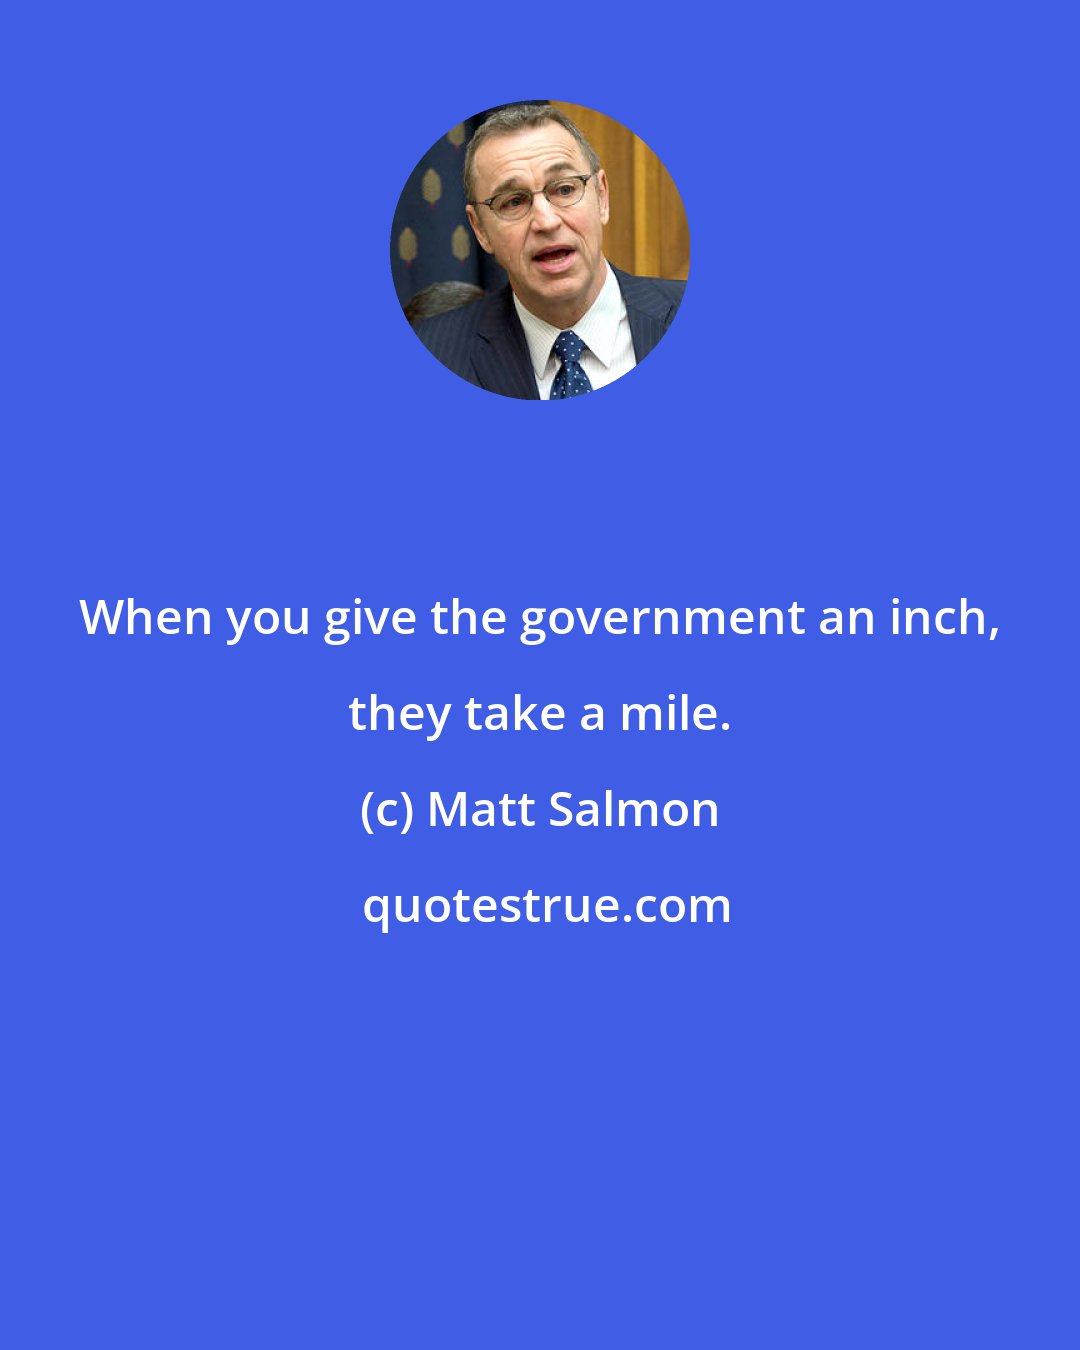 Matt Salmon: When you give the government an inch, they take a mile.